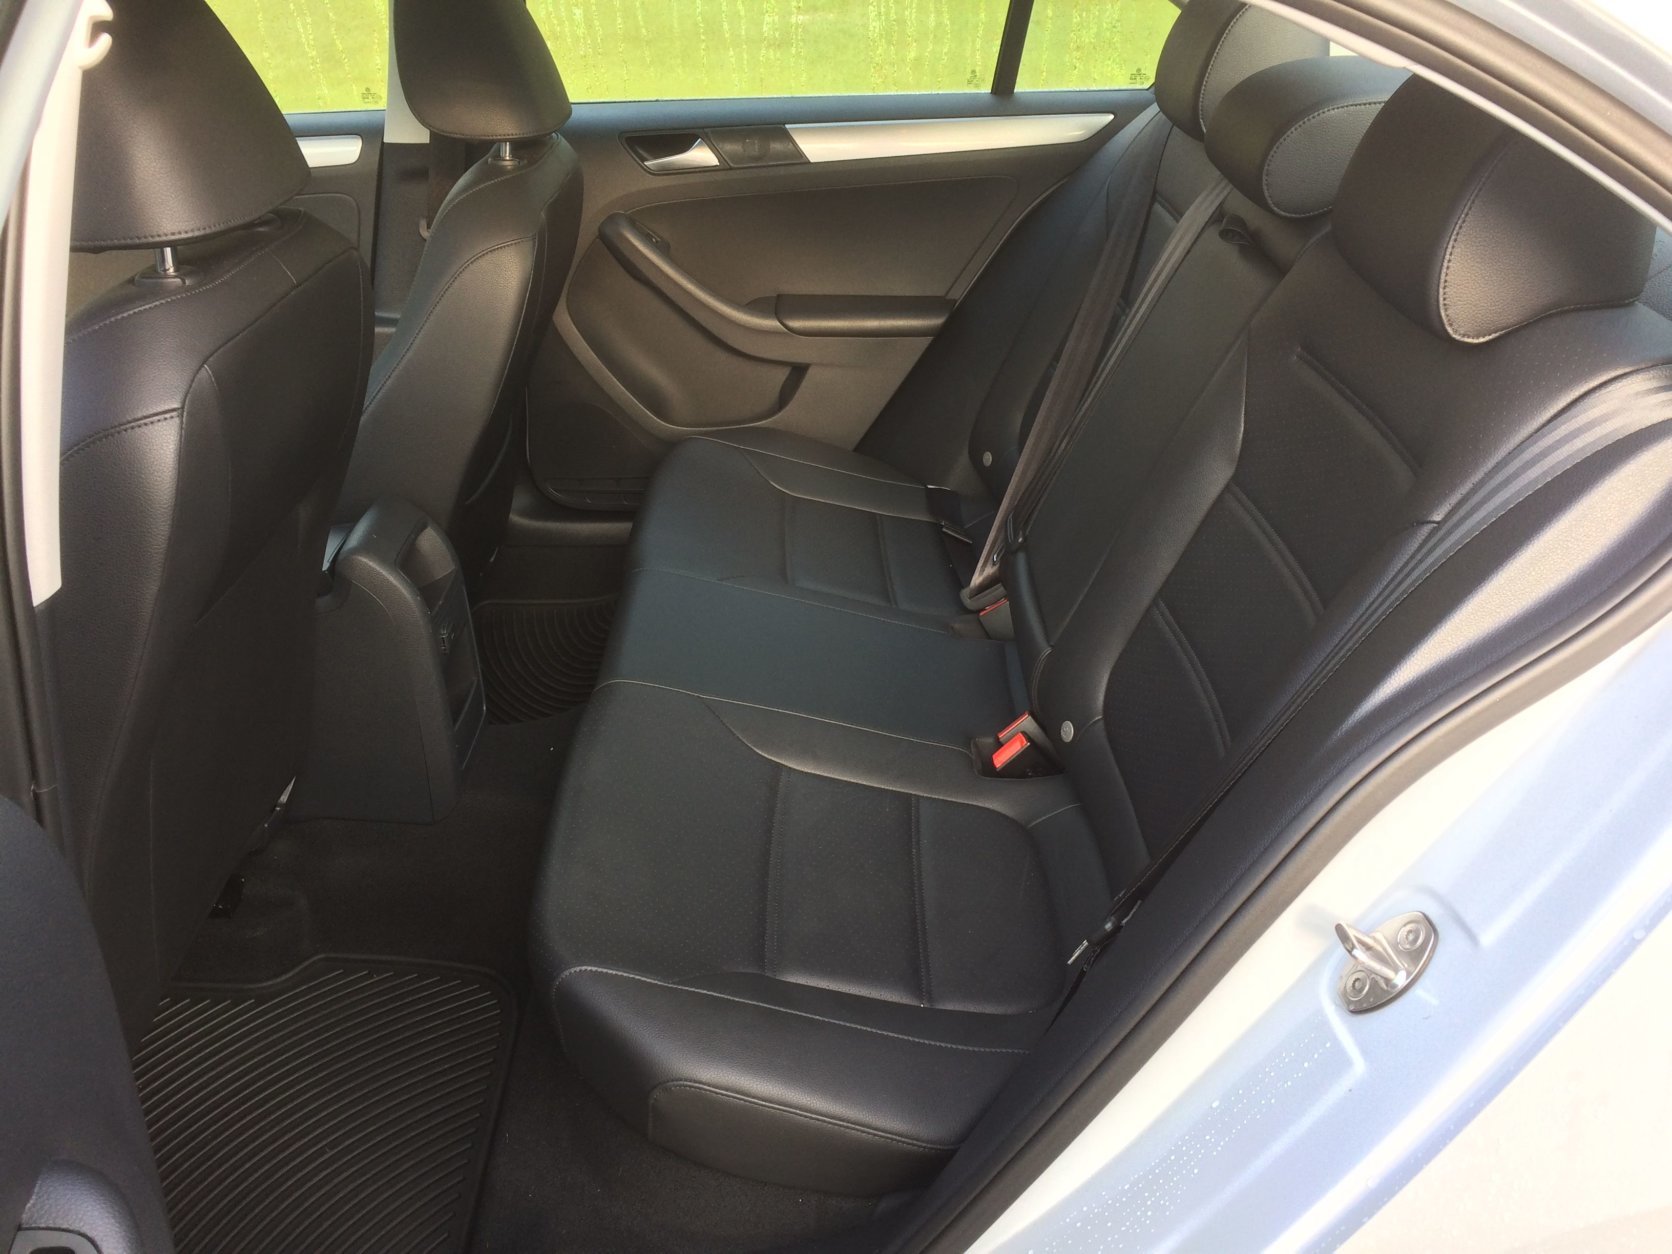 Jetta comes in at the top of the class when it comes to space, with a back seat that can handle adults. The space offers enough head and leg room and the trunk is spacious too. (WTOP/Mike Parris) 